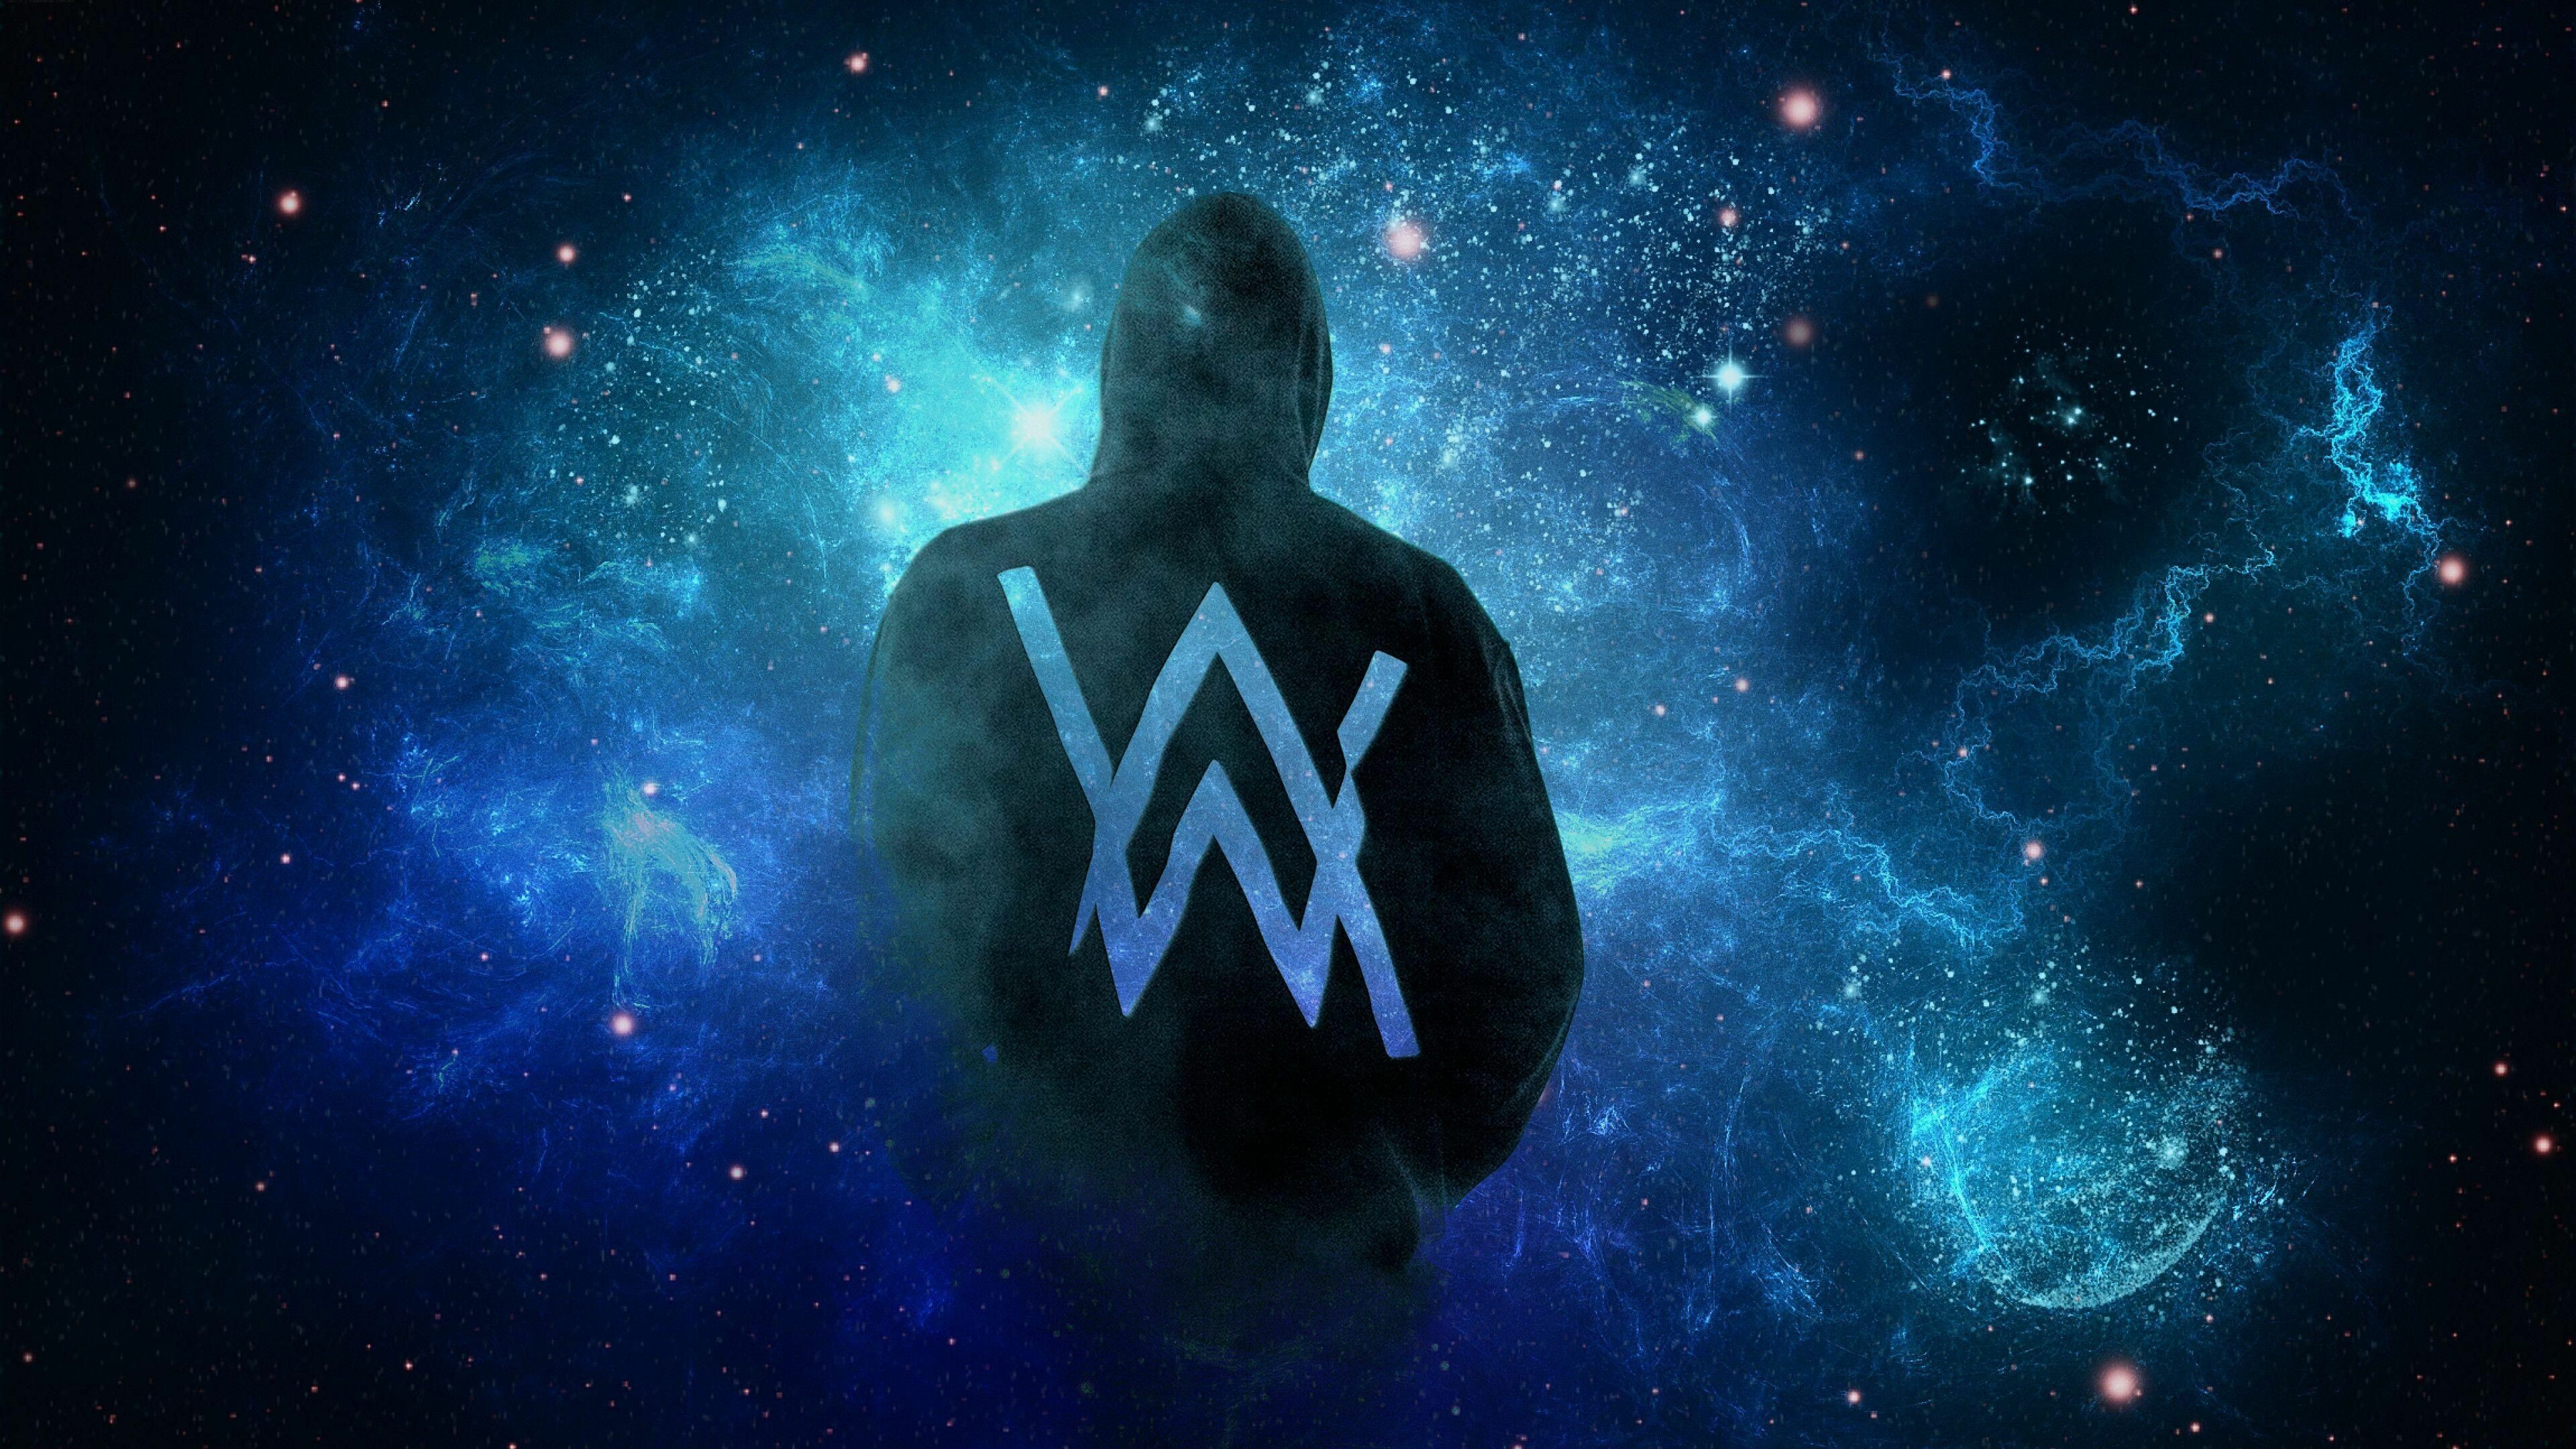 Alan Walker: A British-born Norwegian music producer and DJ, Known for the critically acclaimed single Faded. 3840x2160 4K Background.